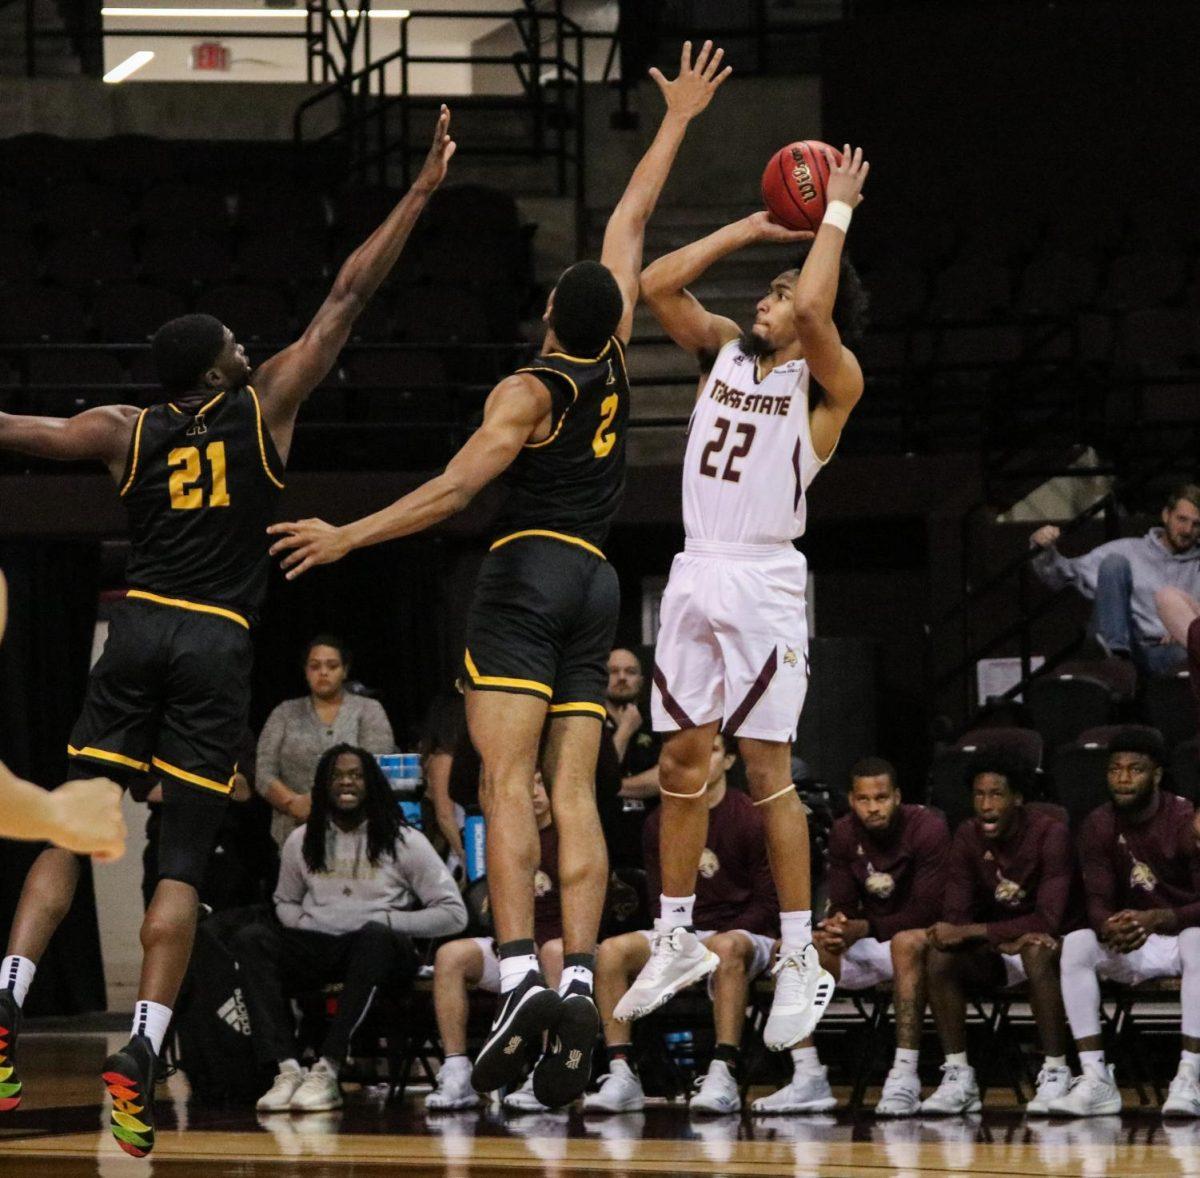 Senior guard Nijal Pearson, (22), shoots a three-pointer during the second half of a game against Appalachian State, Saturday, Jan. 11, 2019, at Strahan Arena. After scoring 22 points, Pearson is only a few points from becoming the all-time scorer at Texas State.